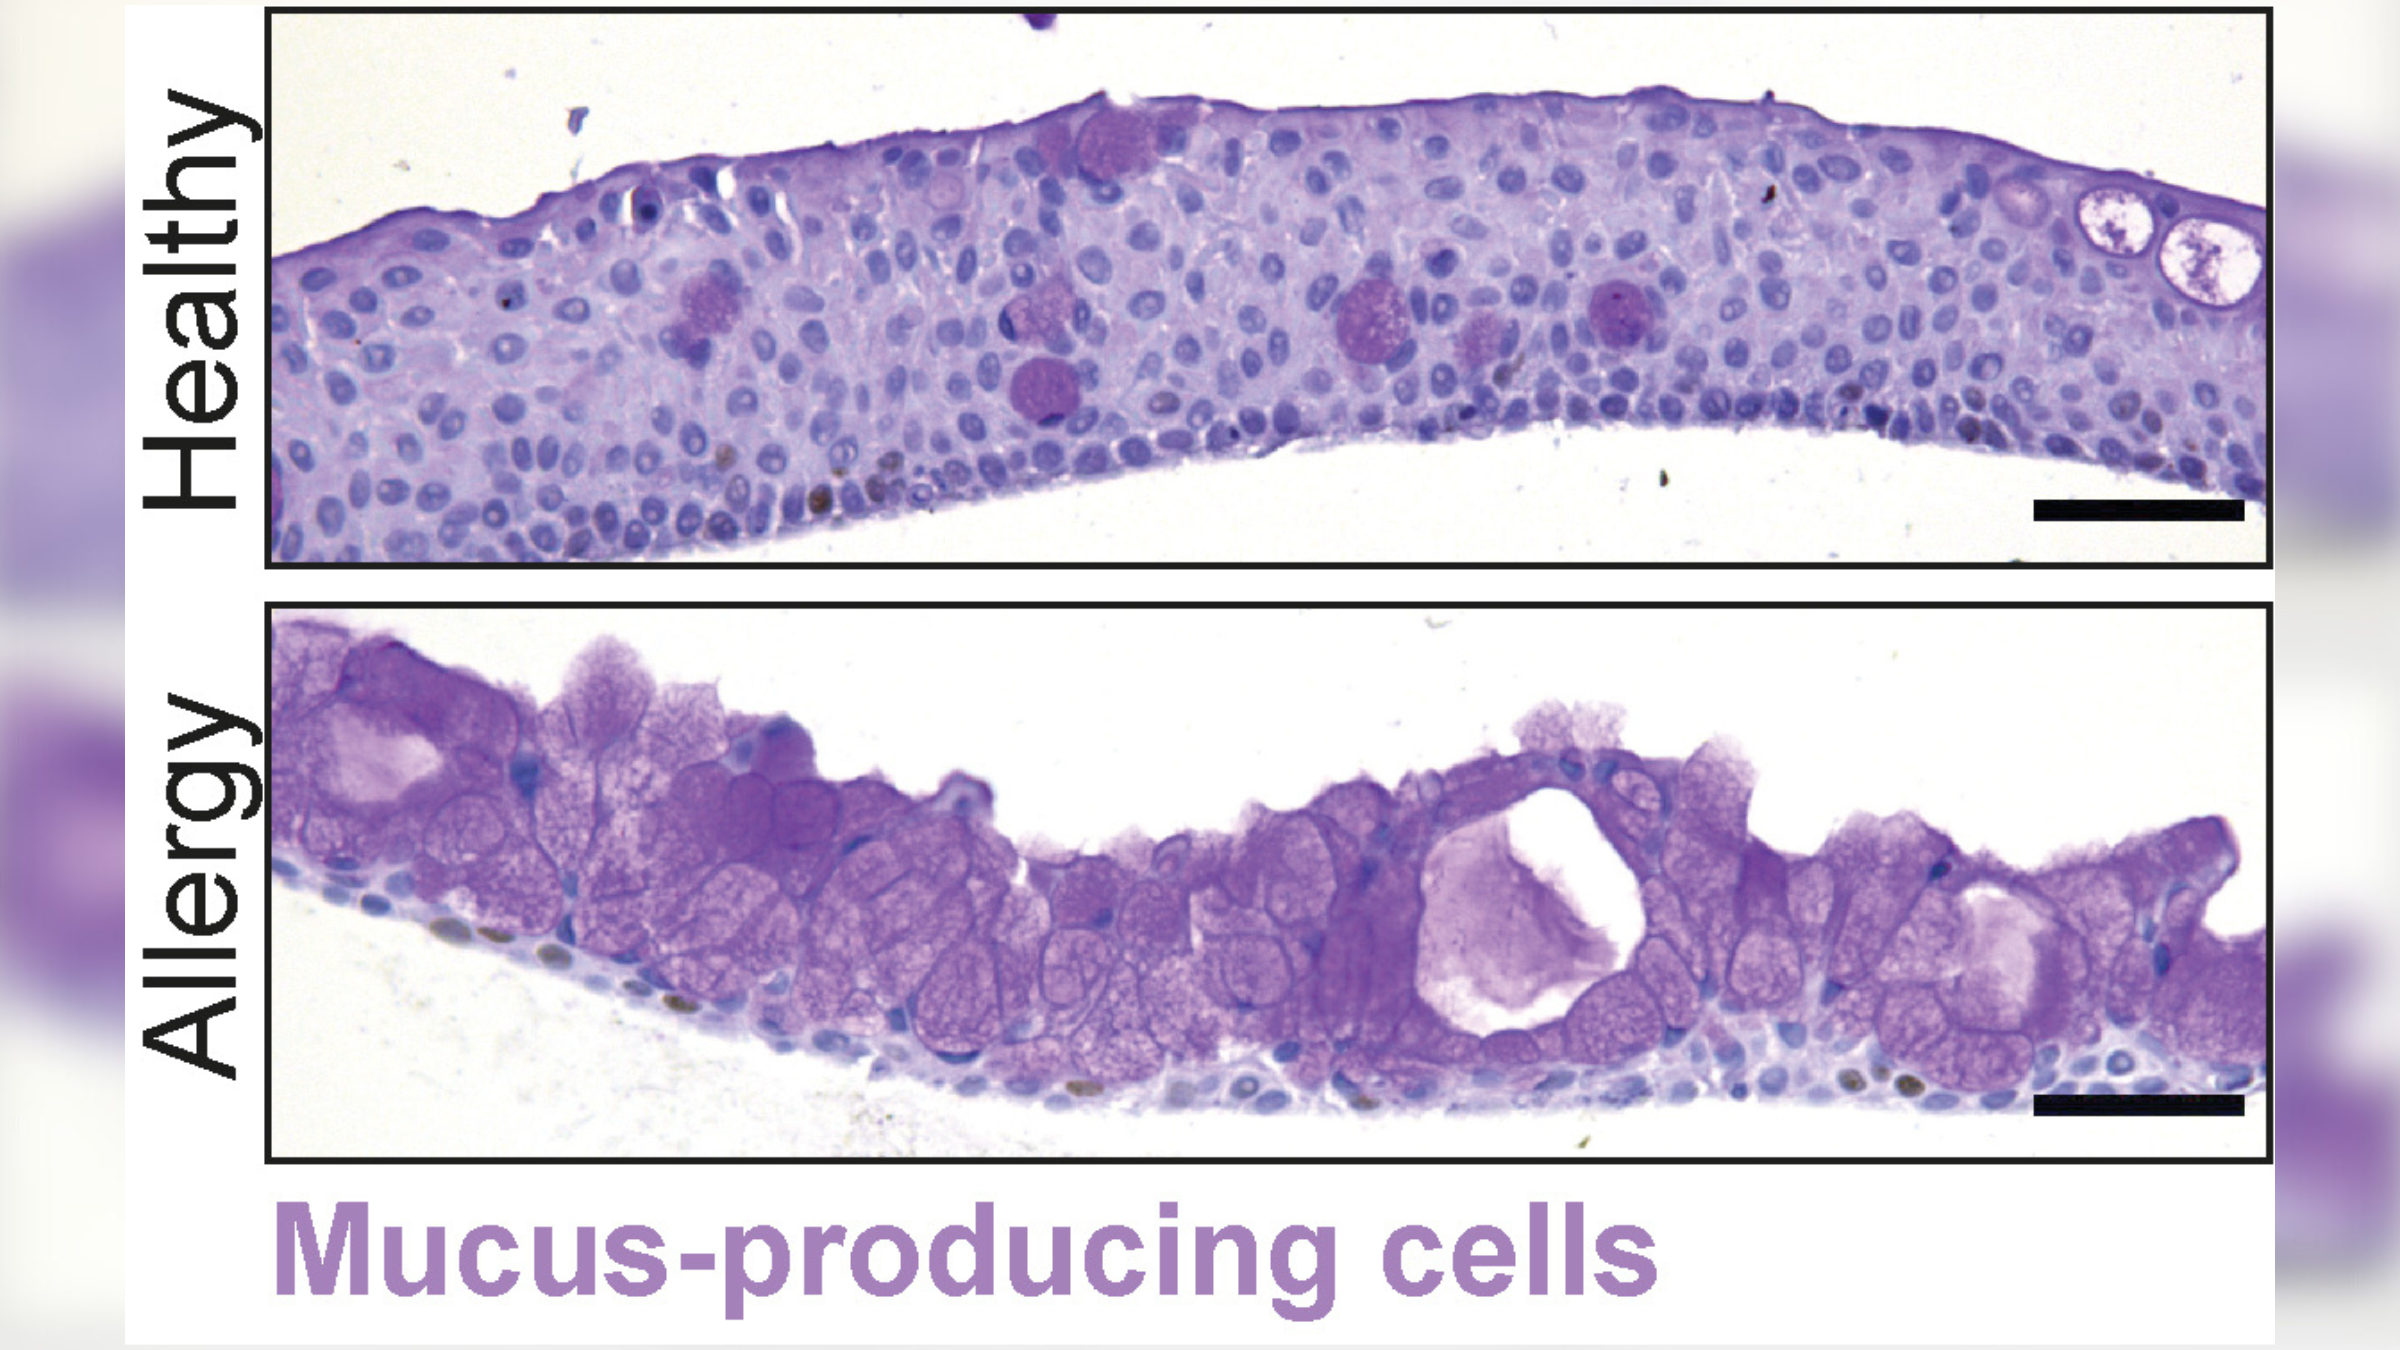 Microscope image comparing the conjunctiva organoid before the induction of allergy-like conditions (at the top) and after (at the bottom). There is an increase in the amount of mucus-producing cells in purple at the bottom